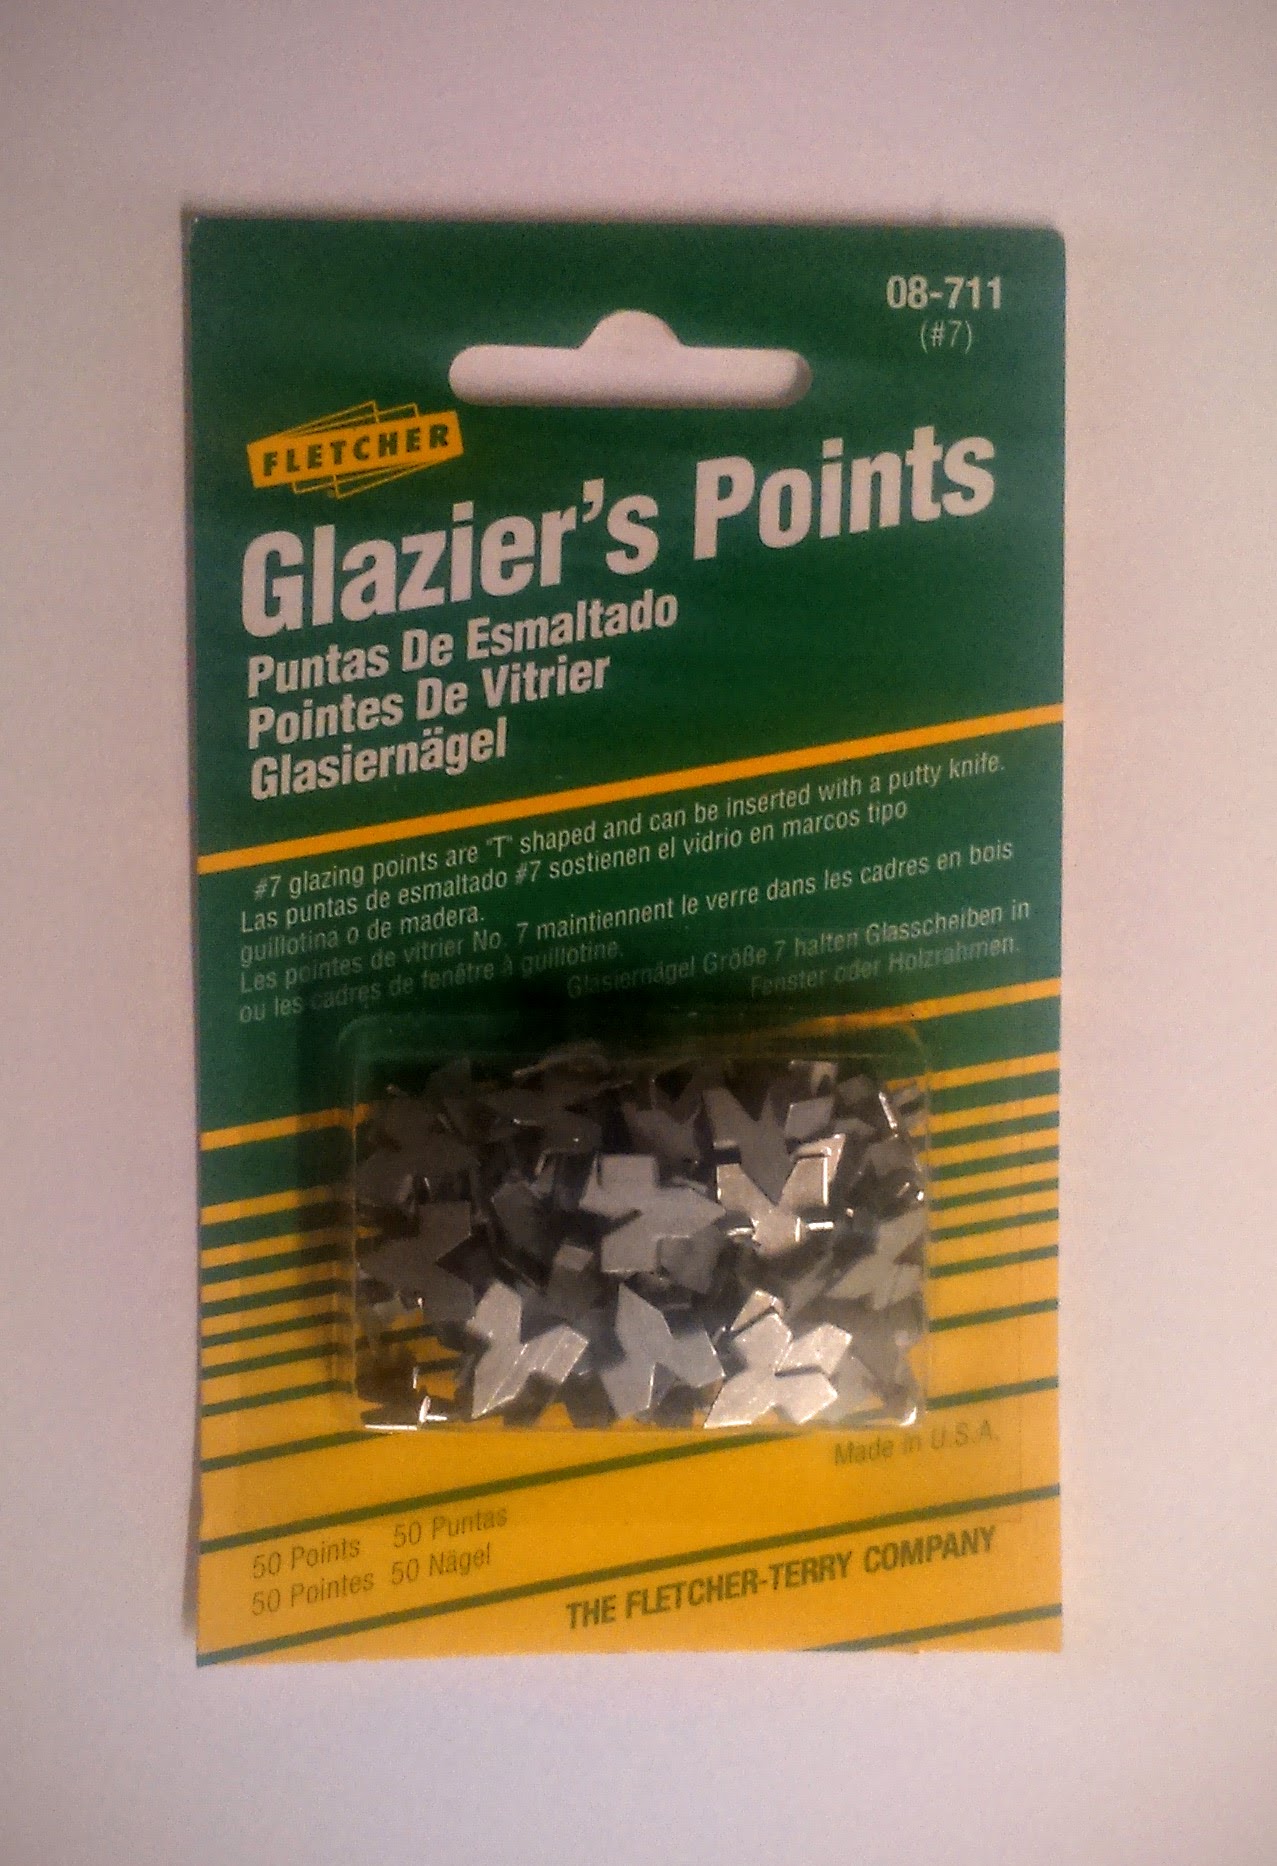 Buy packs of Glaziers Push Points to hold artwork in a frame